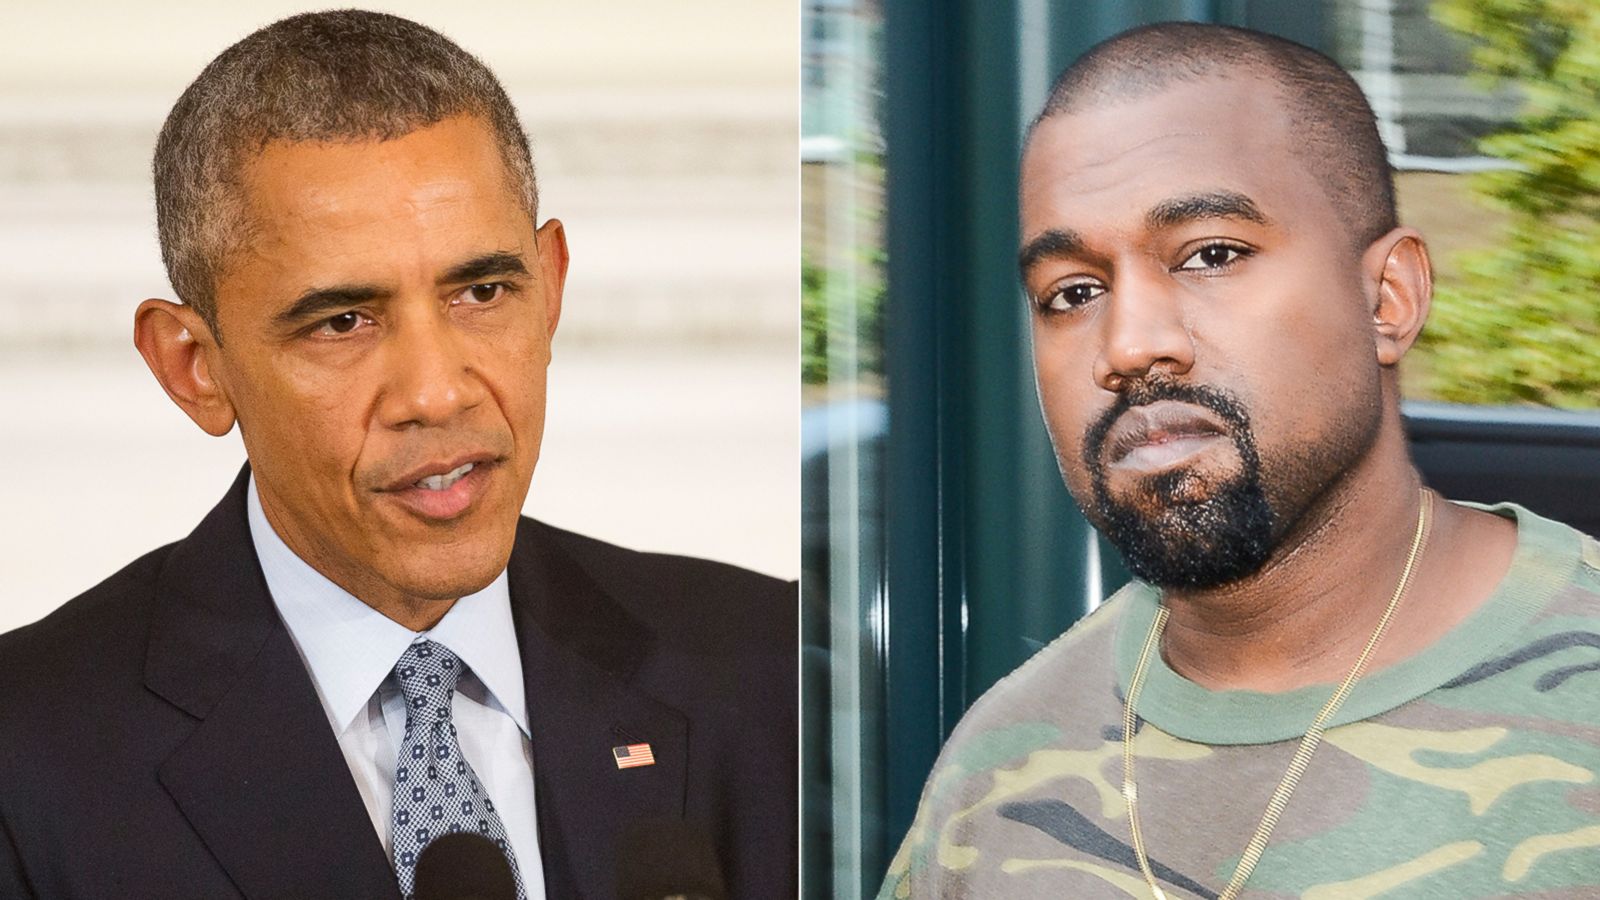 Kanye West tells Carlson why his Obama relationship 'faded' - Los